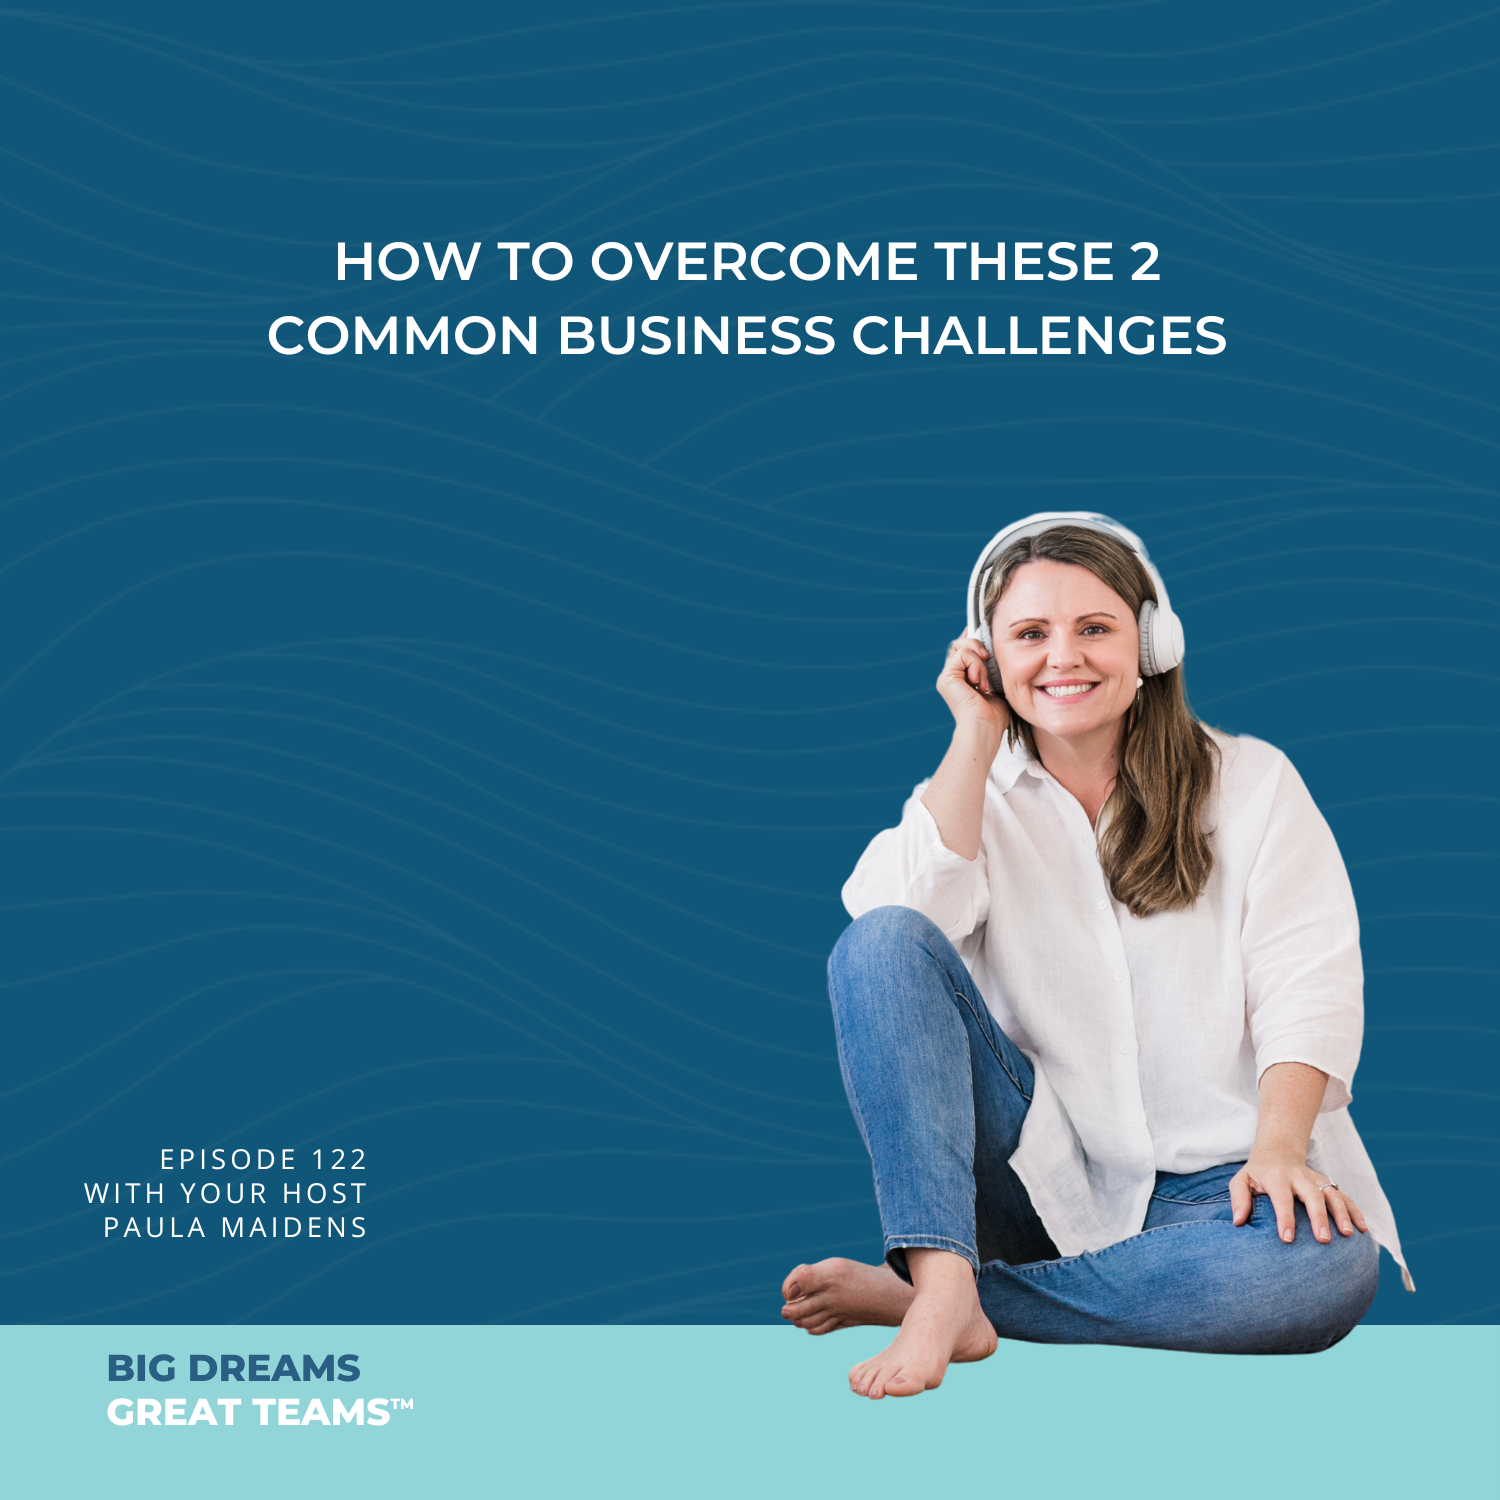 Episode 122 - How to Overcome These 2 Common Business Challenges